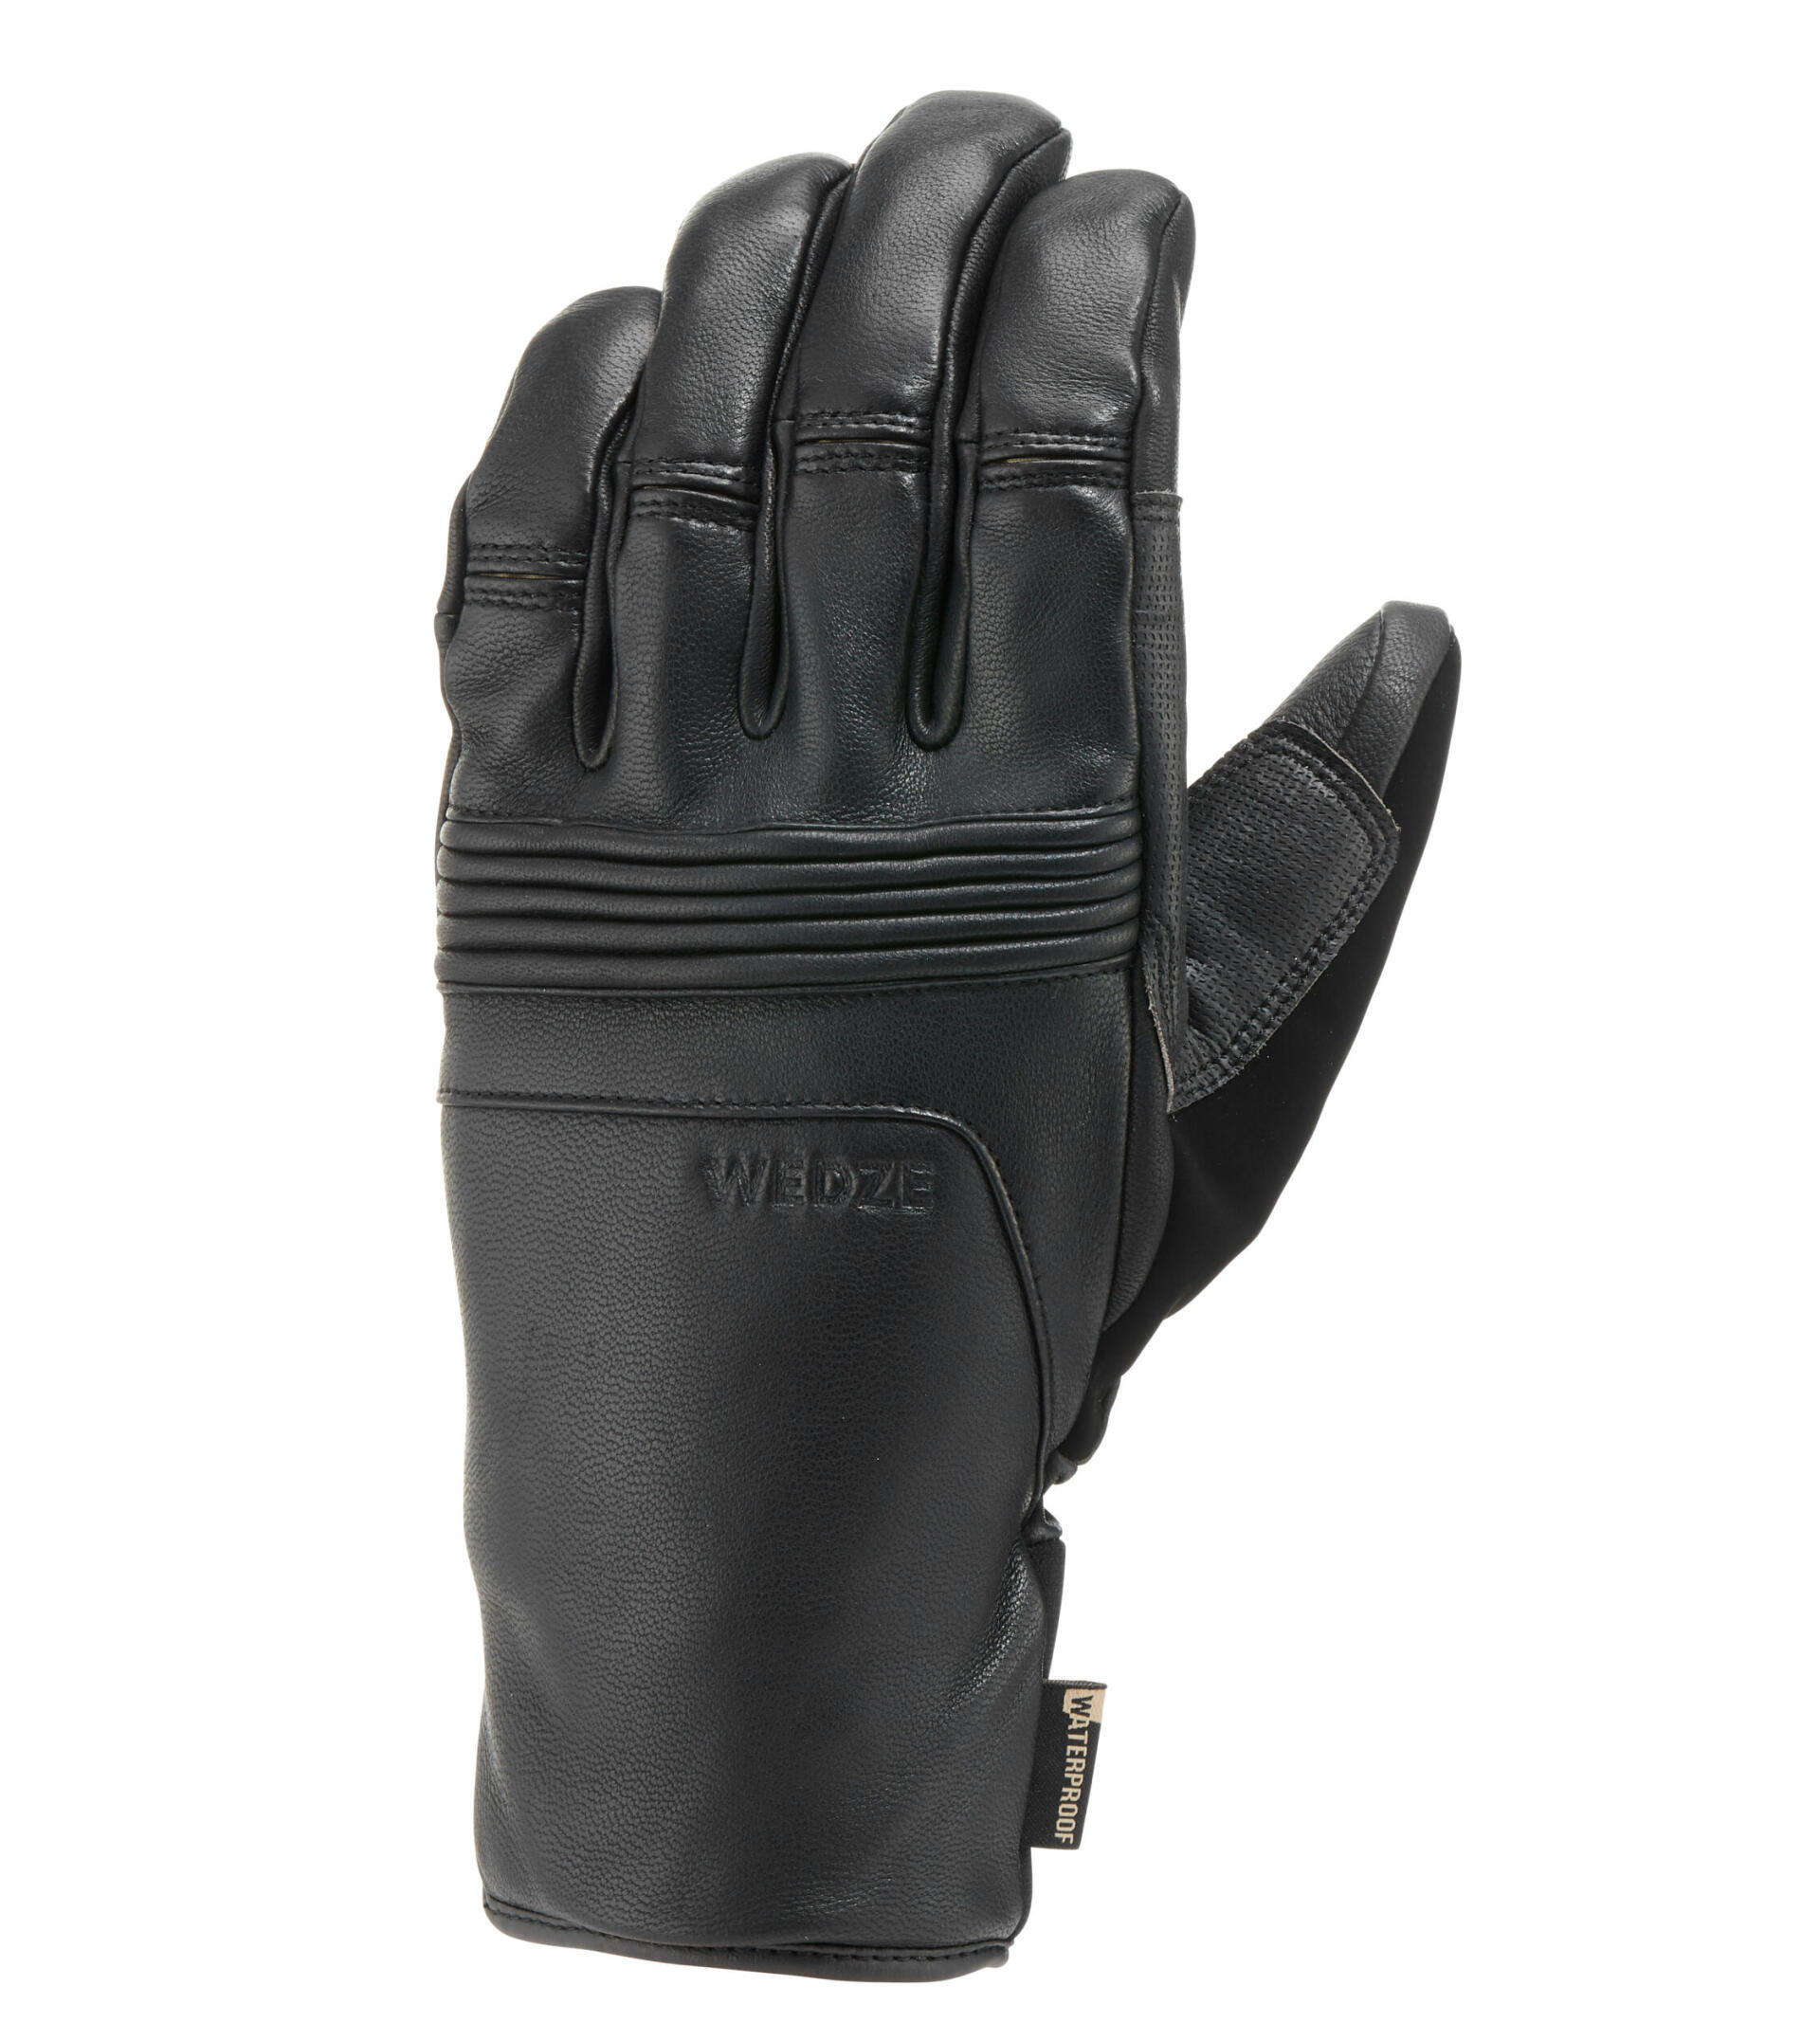 don't get cold hands anymore - gloves